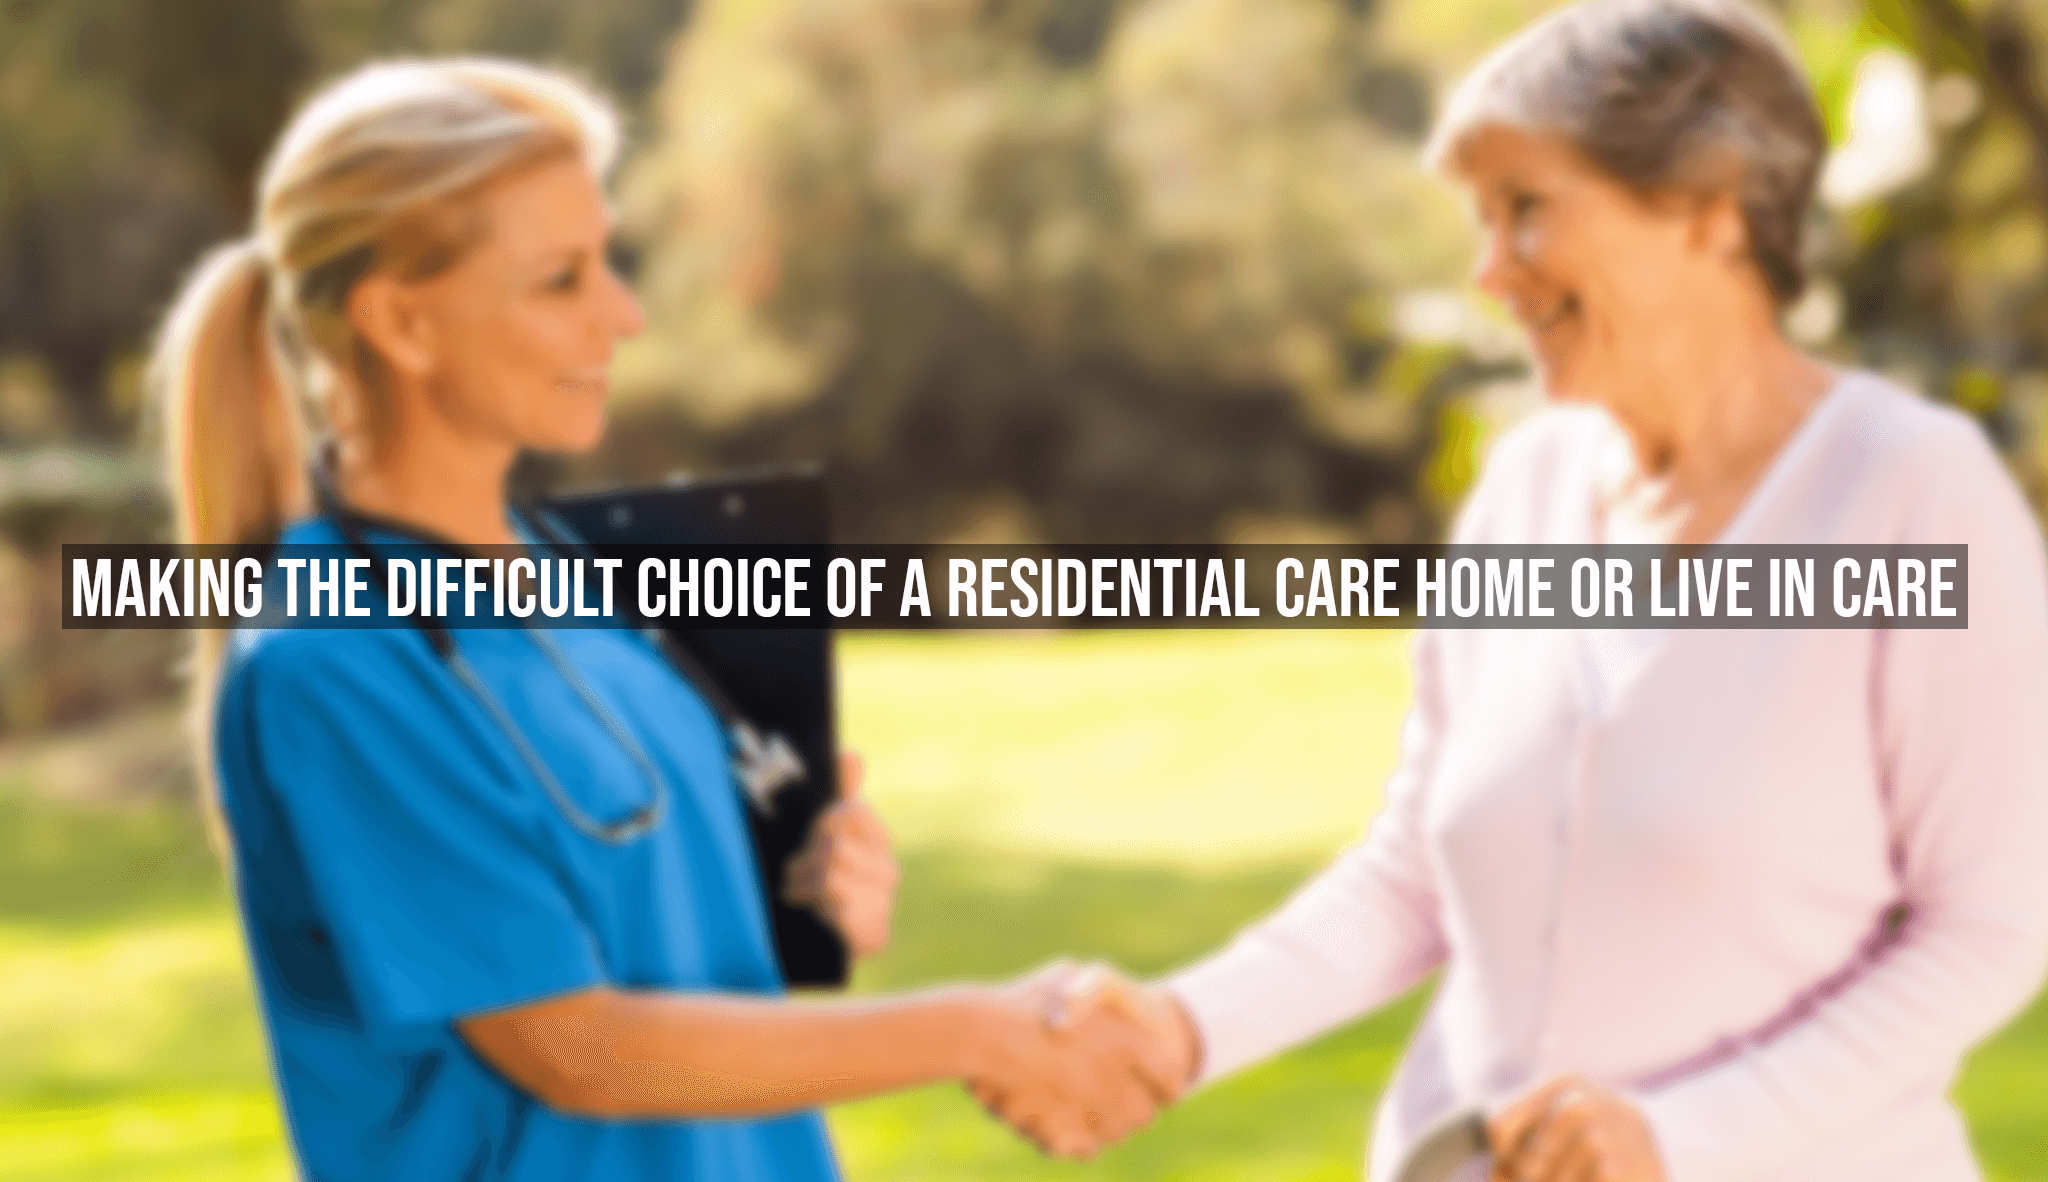 Making the Difficult Choice of a Residential Care Home Or Live in Care